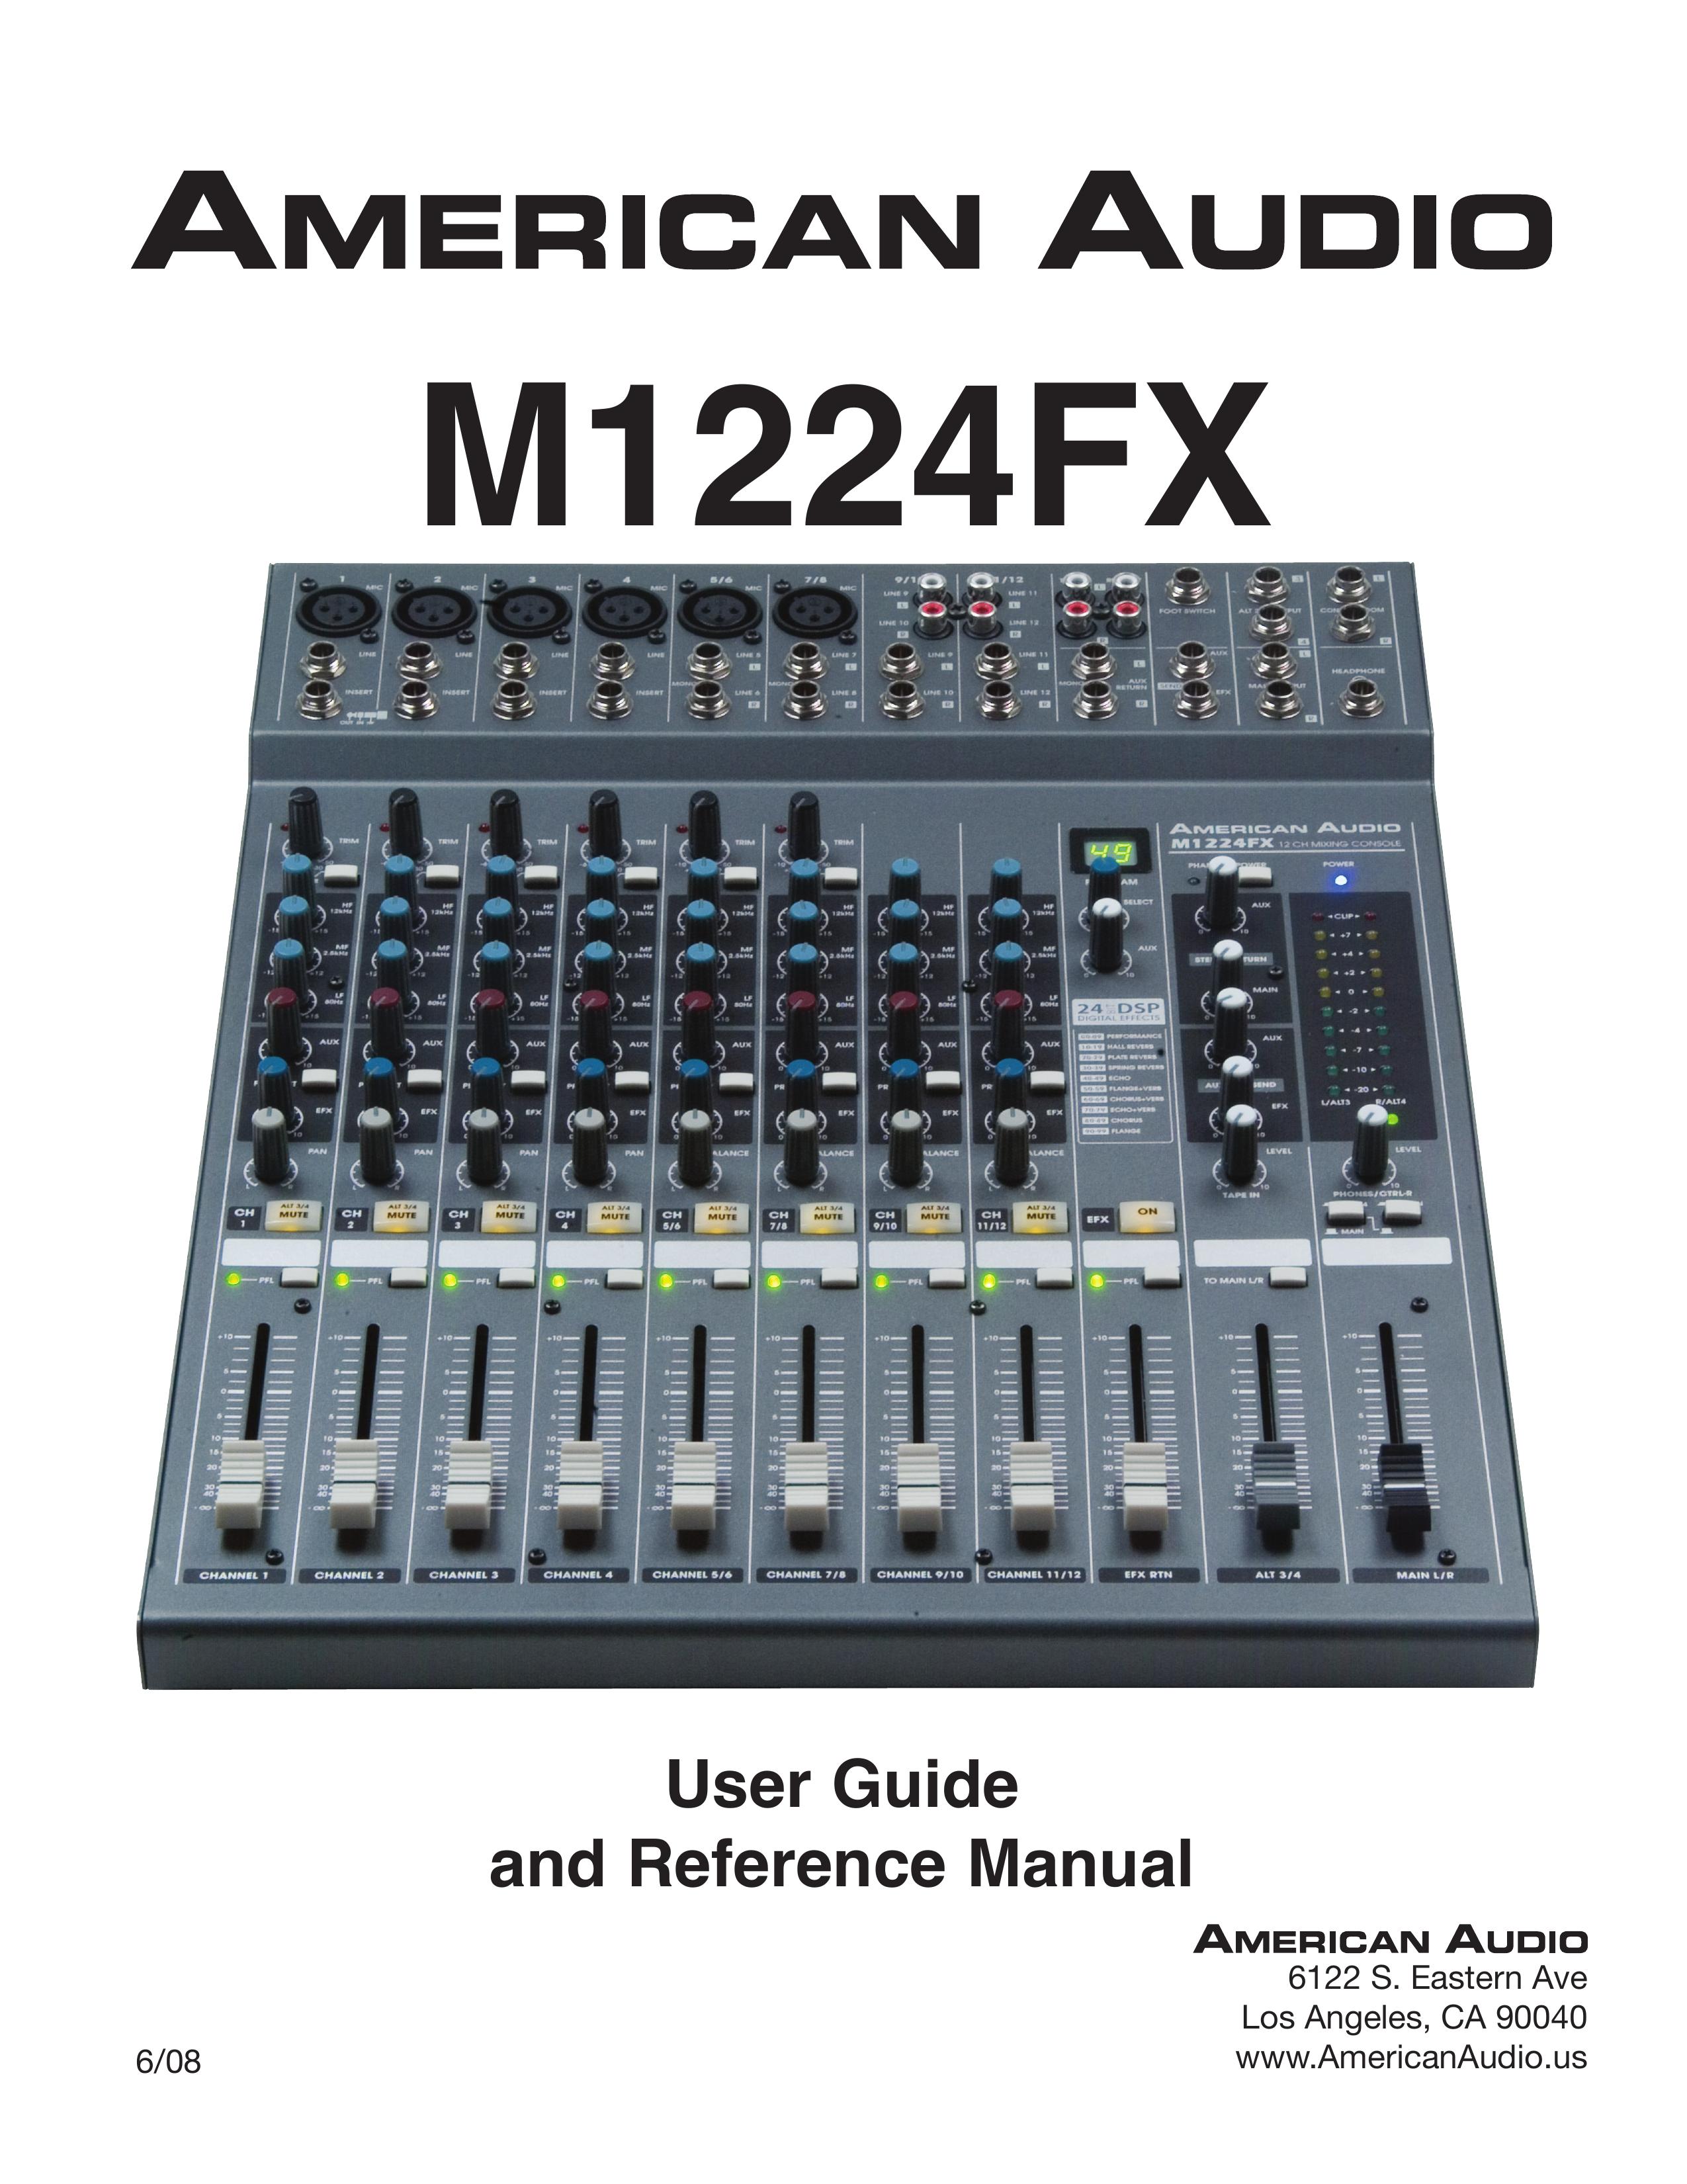 American Audio M1224FX Music Mixer User Manual (Page 1)